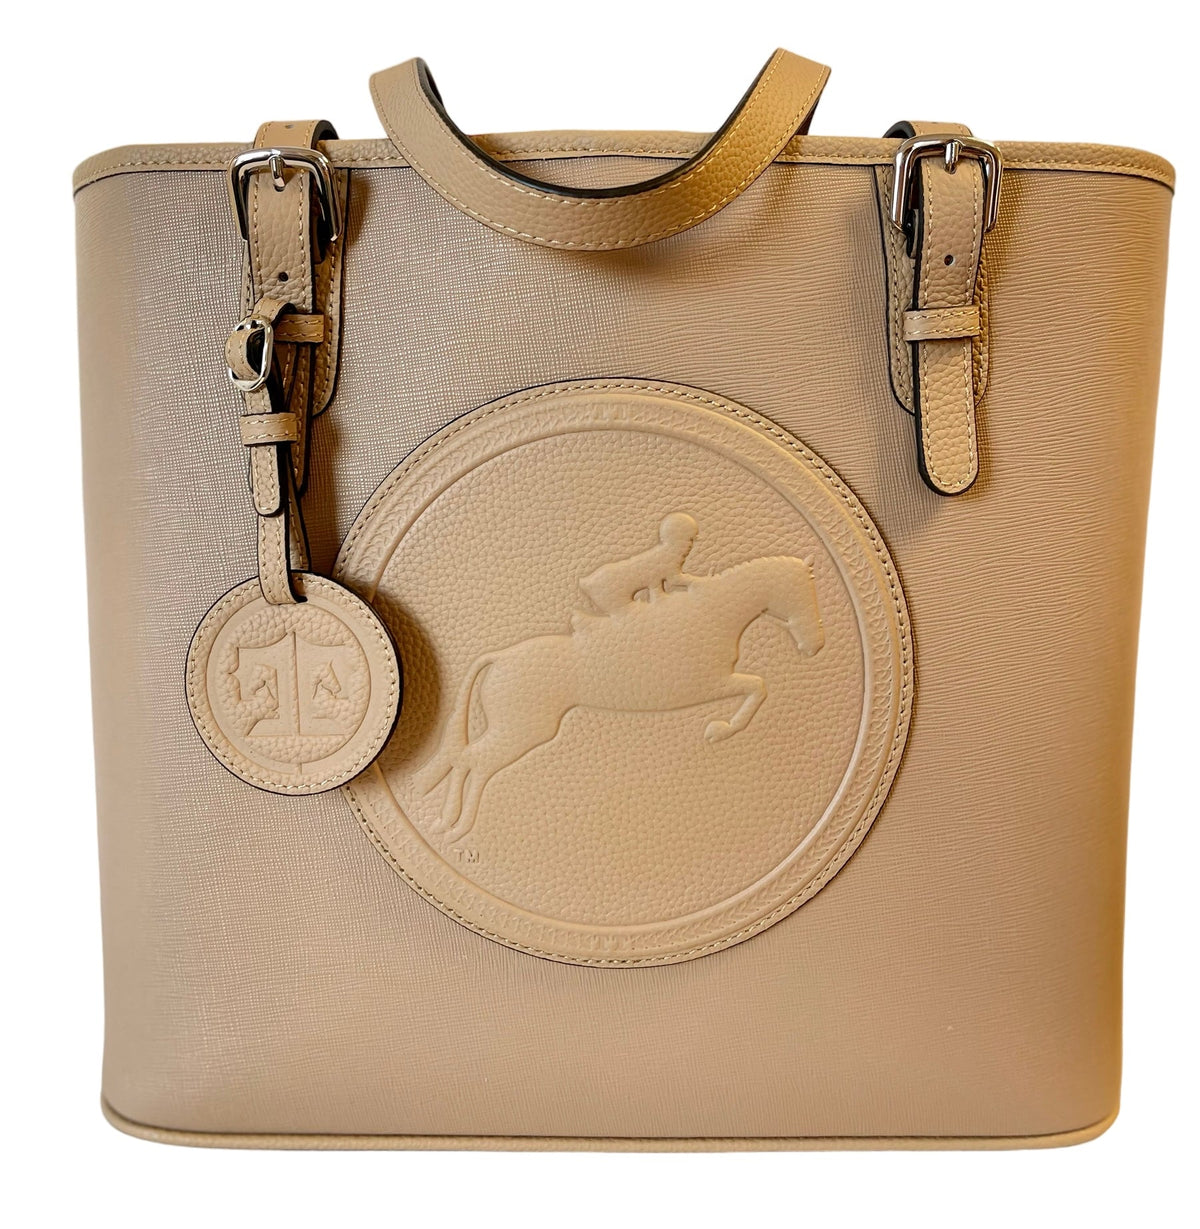 Tucker Tweed Leather Handbags The James River Carry All: Hunter/Jumper